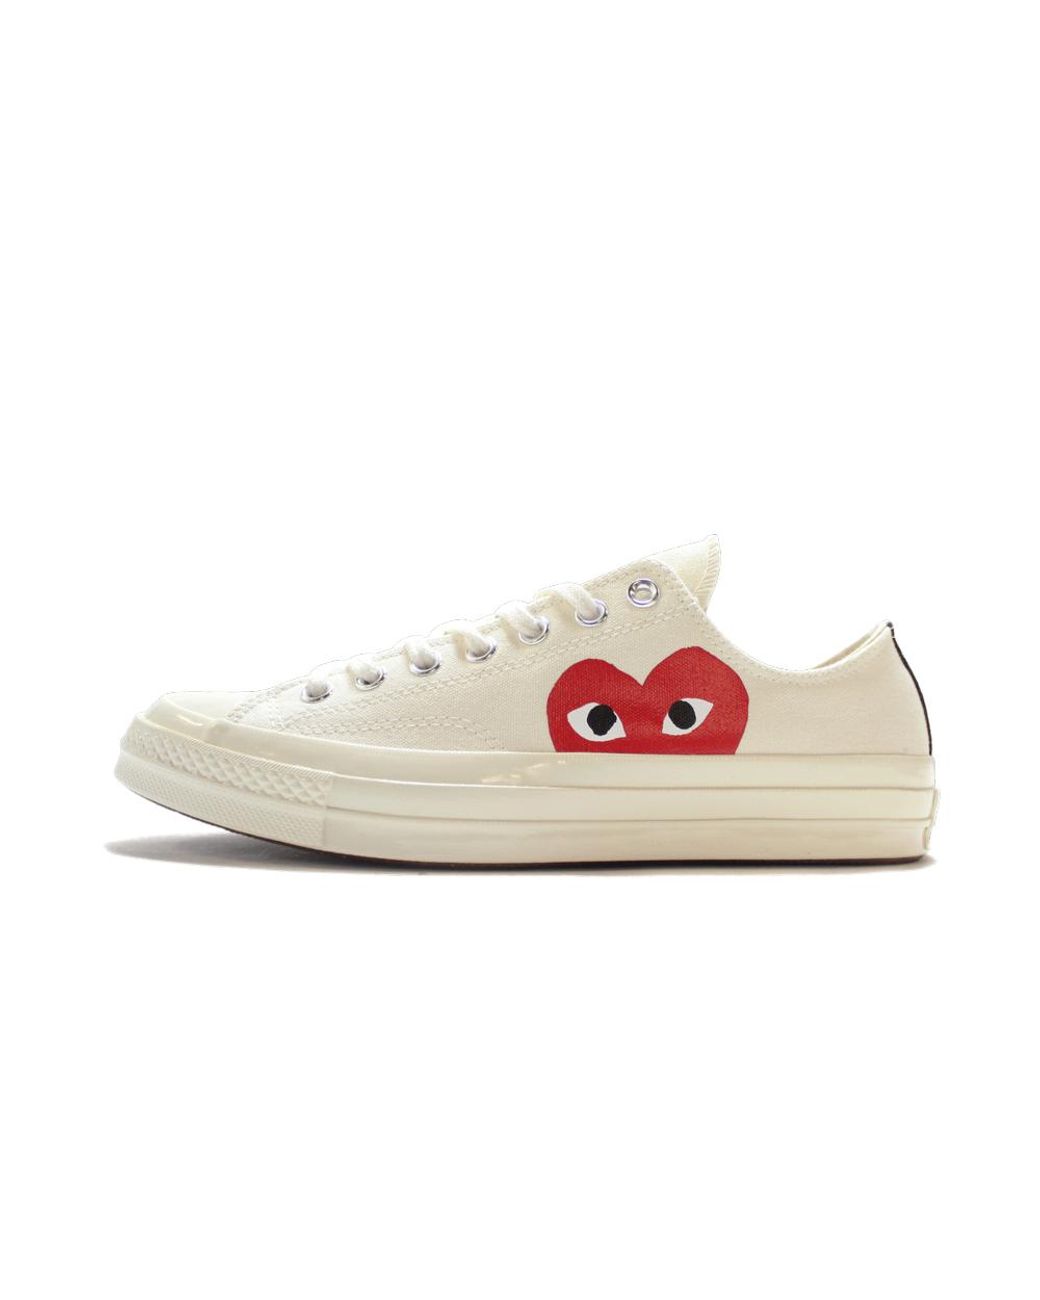 cdg converse low size 3